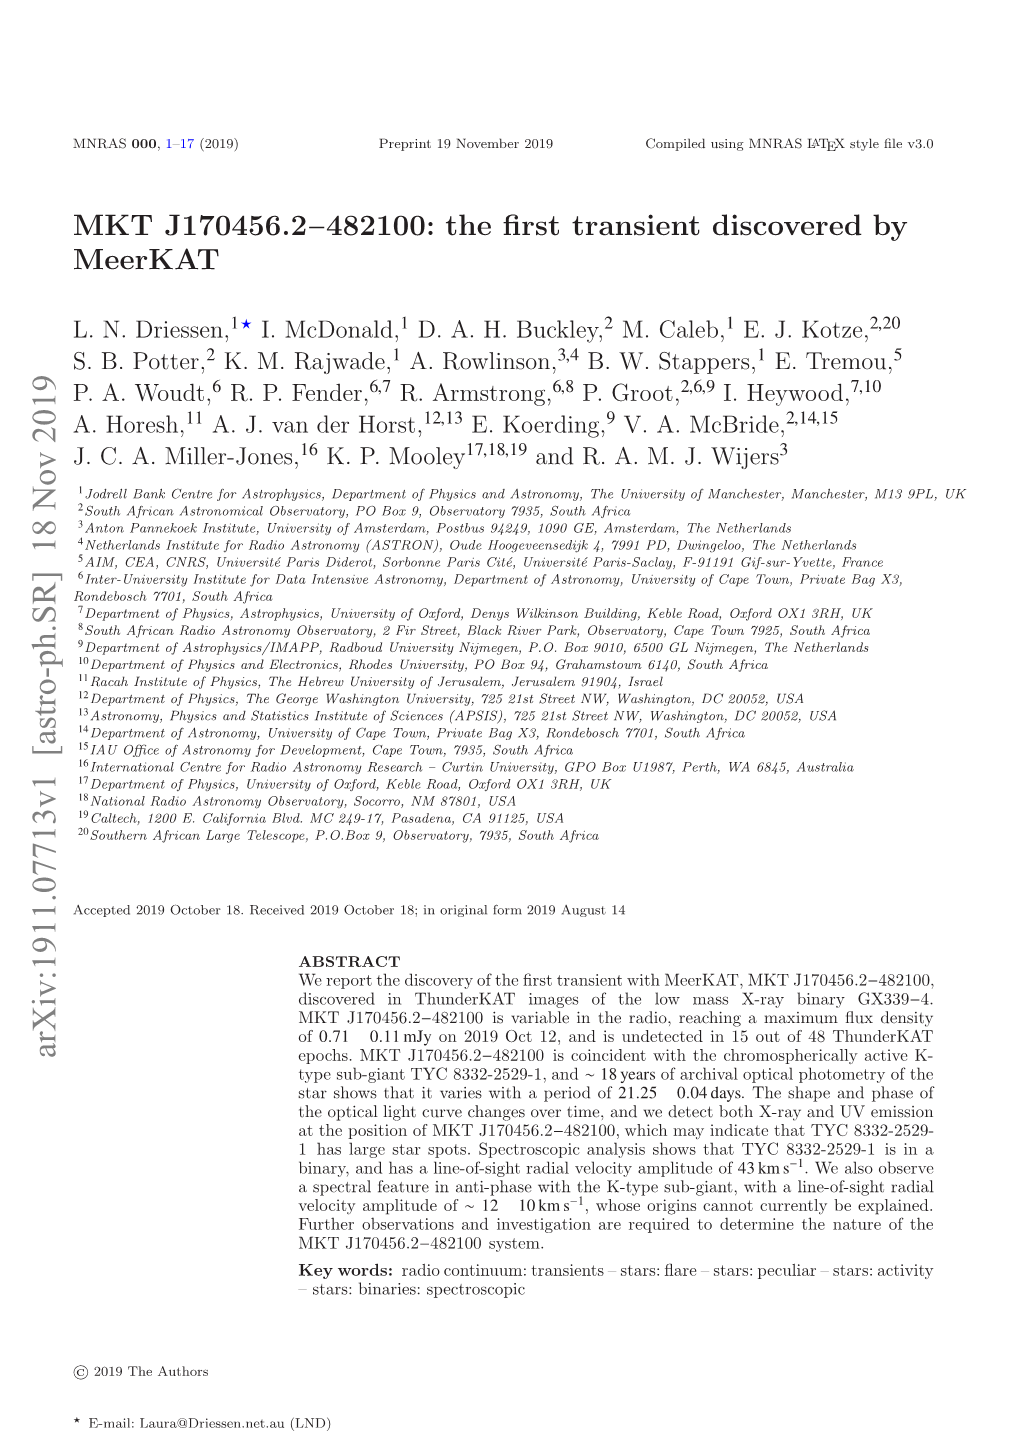 MKT J170456.2−482100: the First Transient Discovered by Meerkat